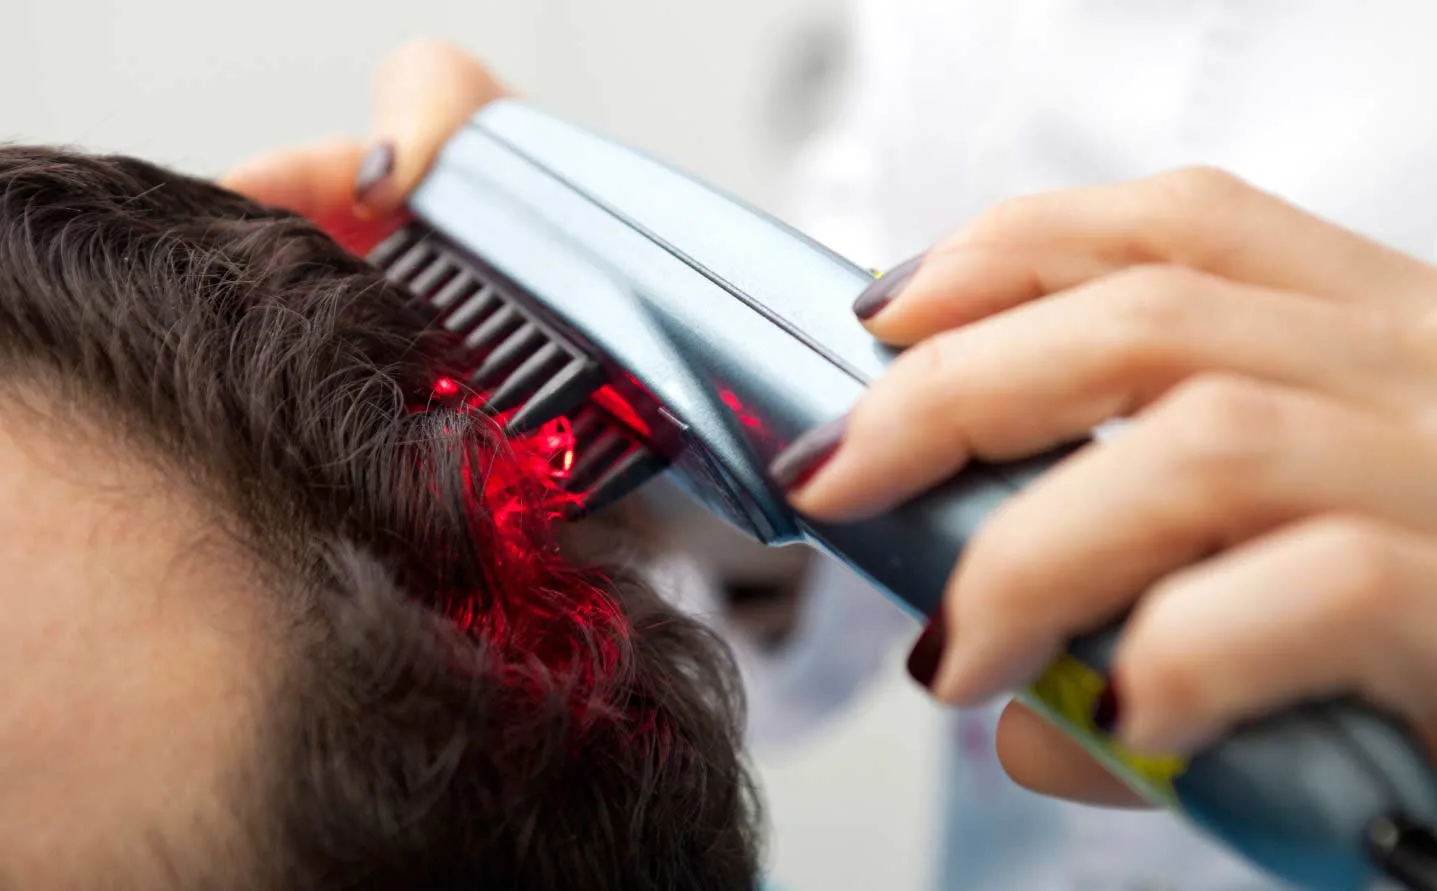 Red light therapy for hair loss